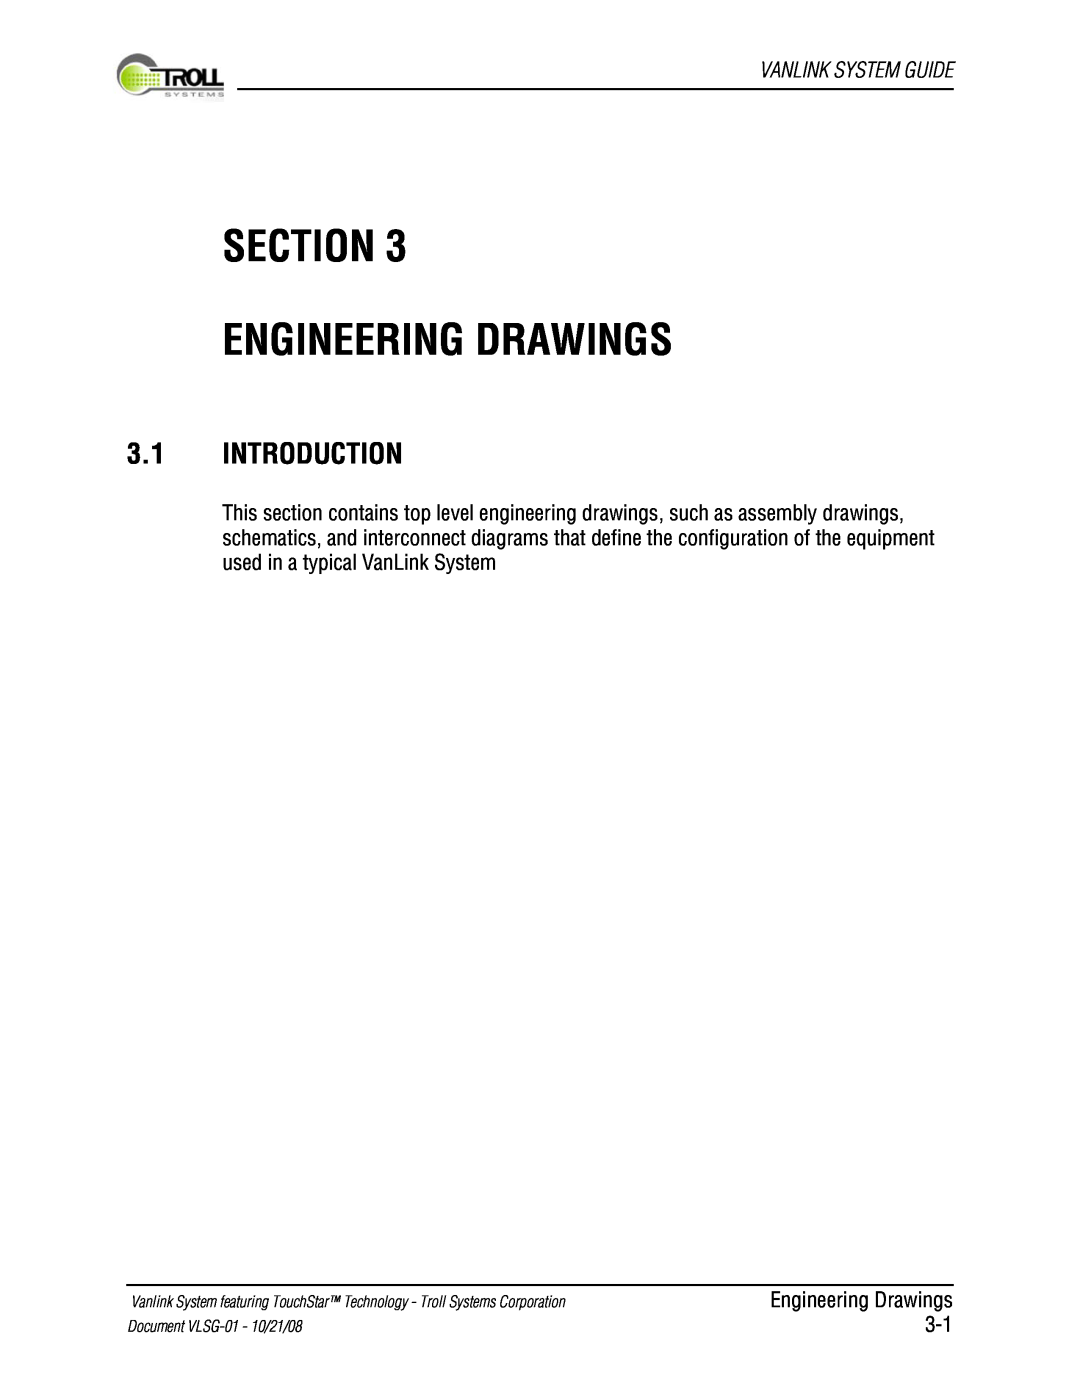 Kyocera manual Section Engineering Drawings, 3.1INTRODUCTION, Vanlink System Guide, Document VLSG-01- 10/21/08 